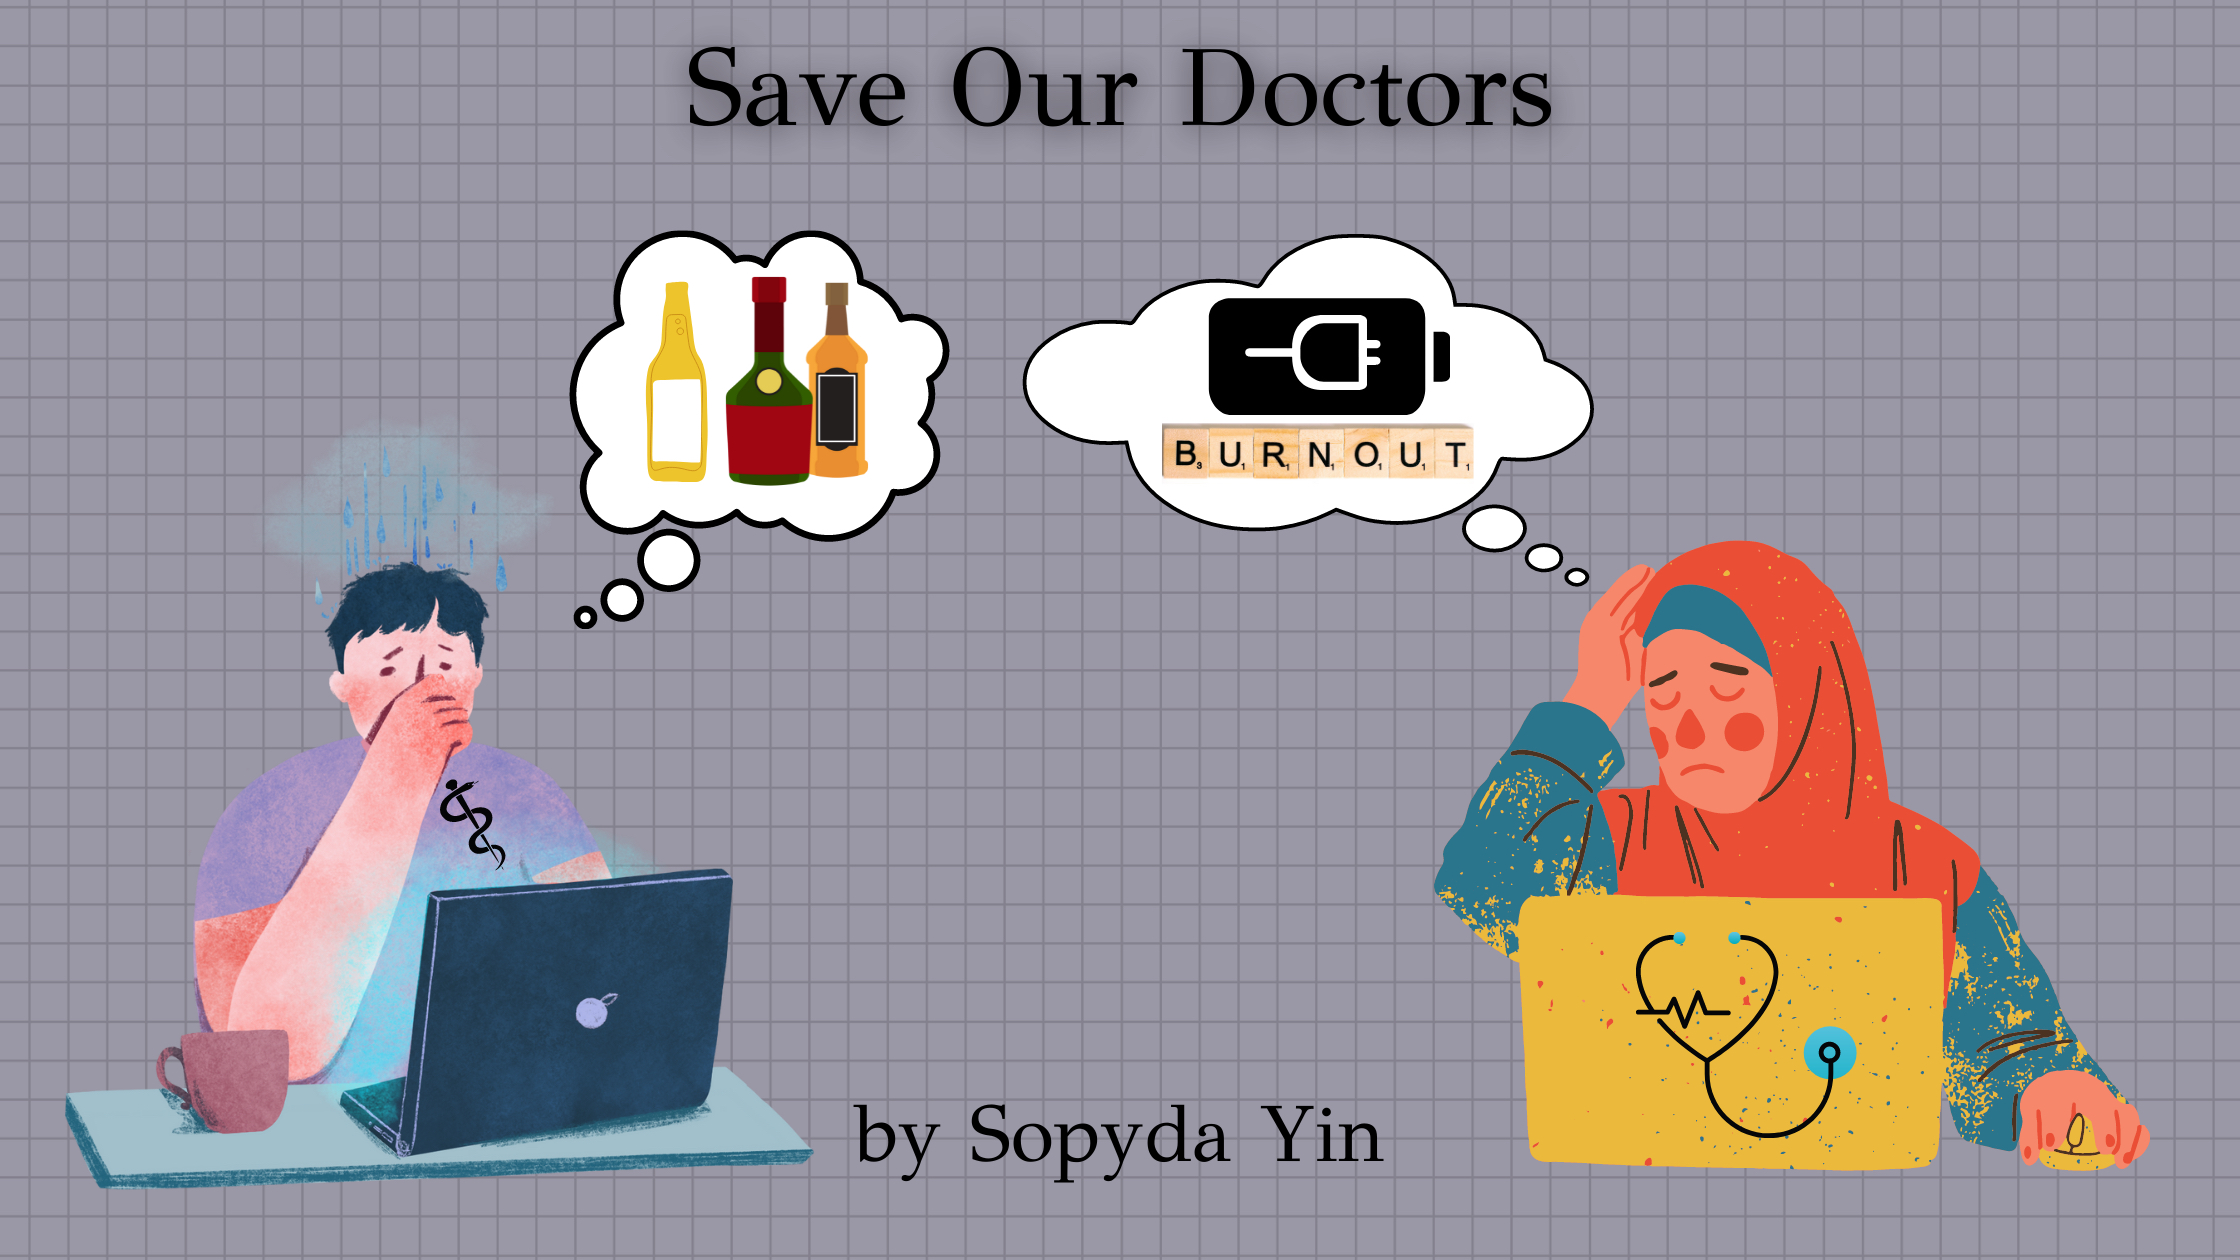 Save Our Doctors